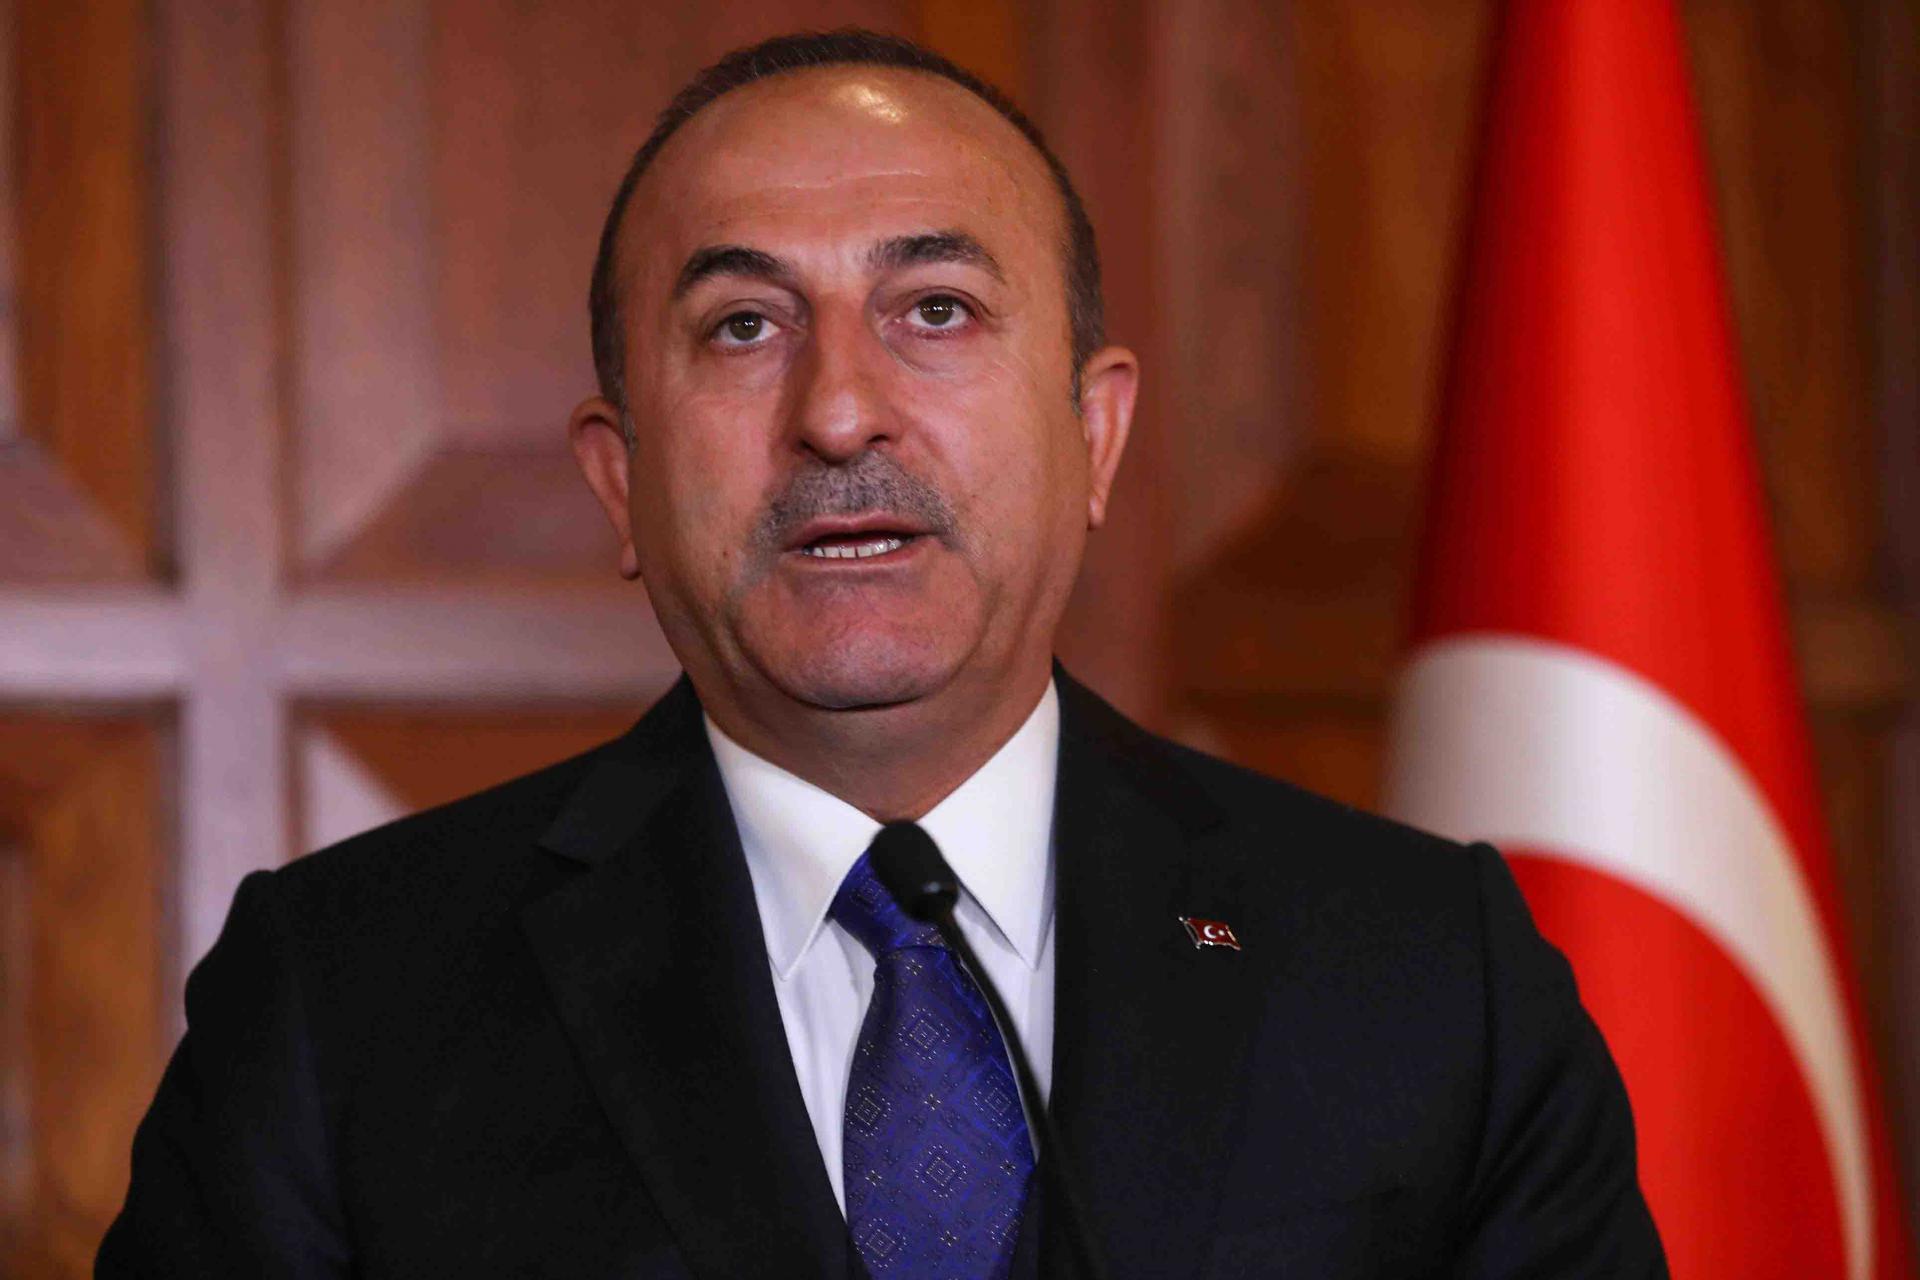 "We disagree with Russia on many issues," Cavusoglu said, pointing to Moscow's "aggression" in the Black Sea